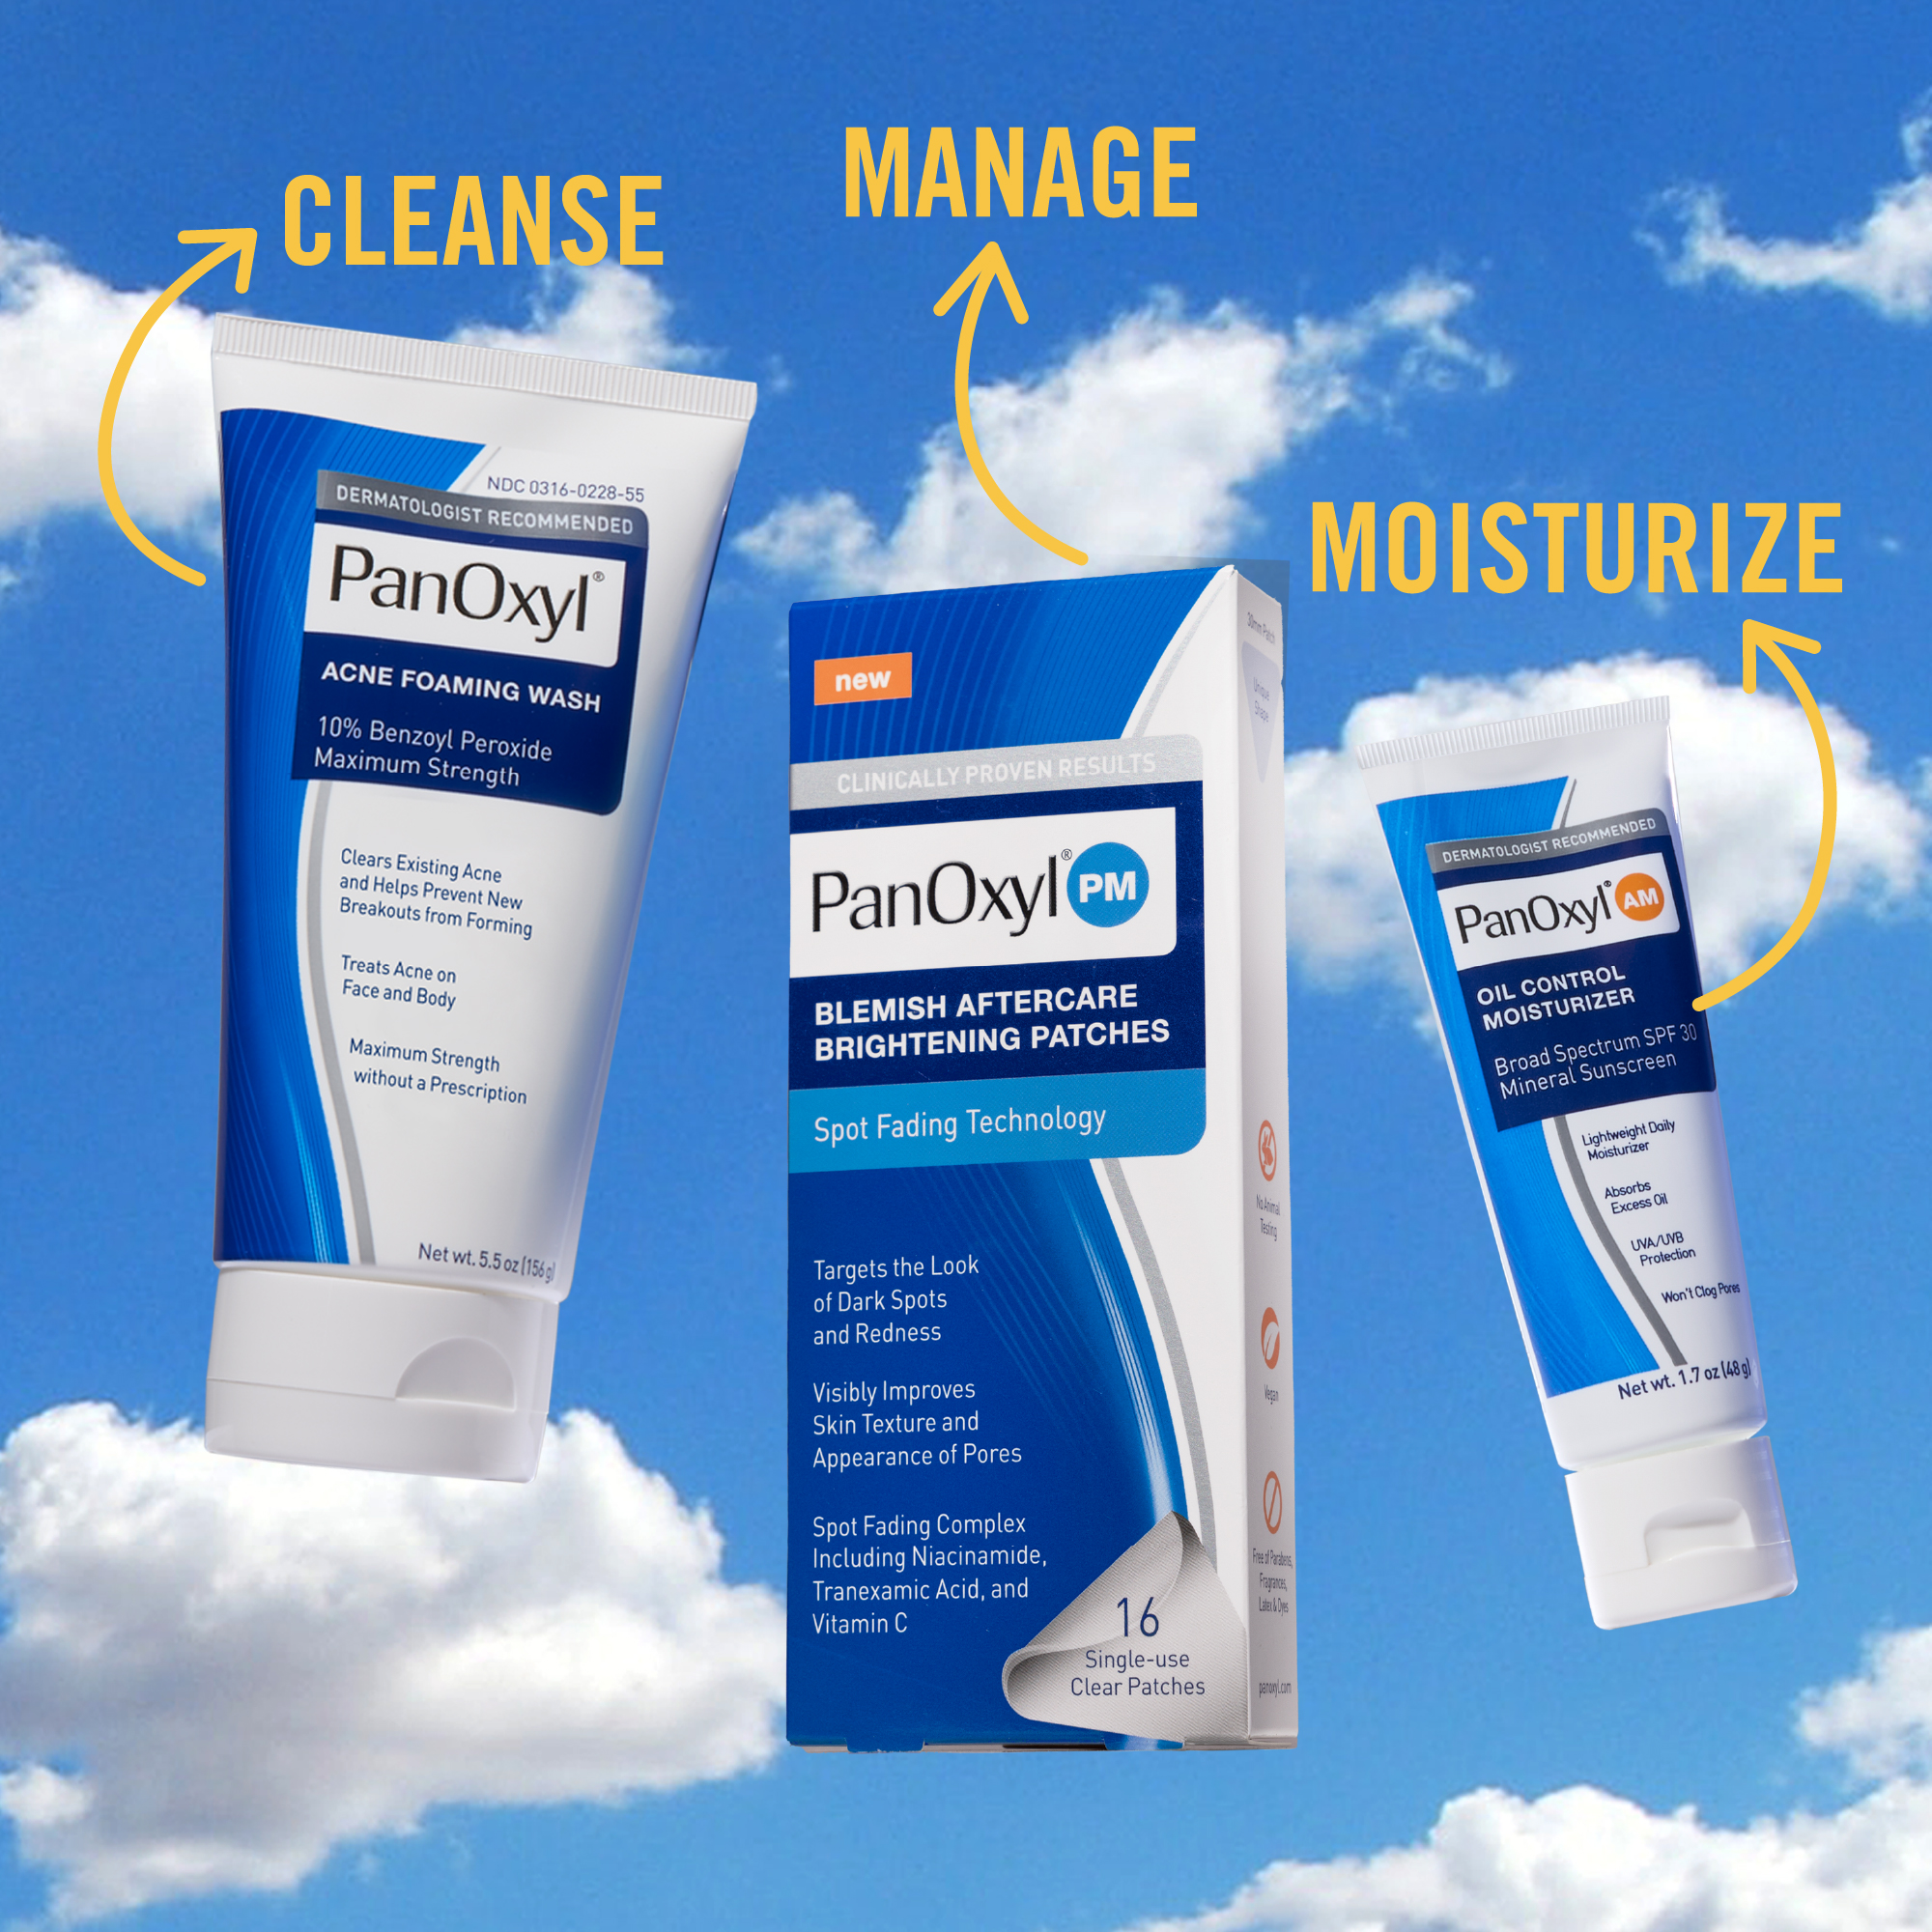 Image of three PanOxyl products with one arrow pointing from each product to its product category: PanOxyl Acne Foaming Wash (Cleanse), PanOxyl PM Blemish Aftercare Brightening Patches (Manage), PanOxyl AM Oil Control Moisturizer (Moisturize).